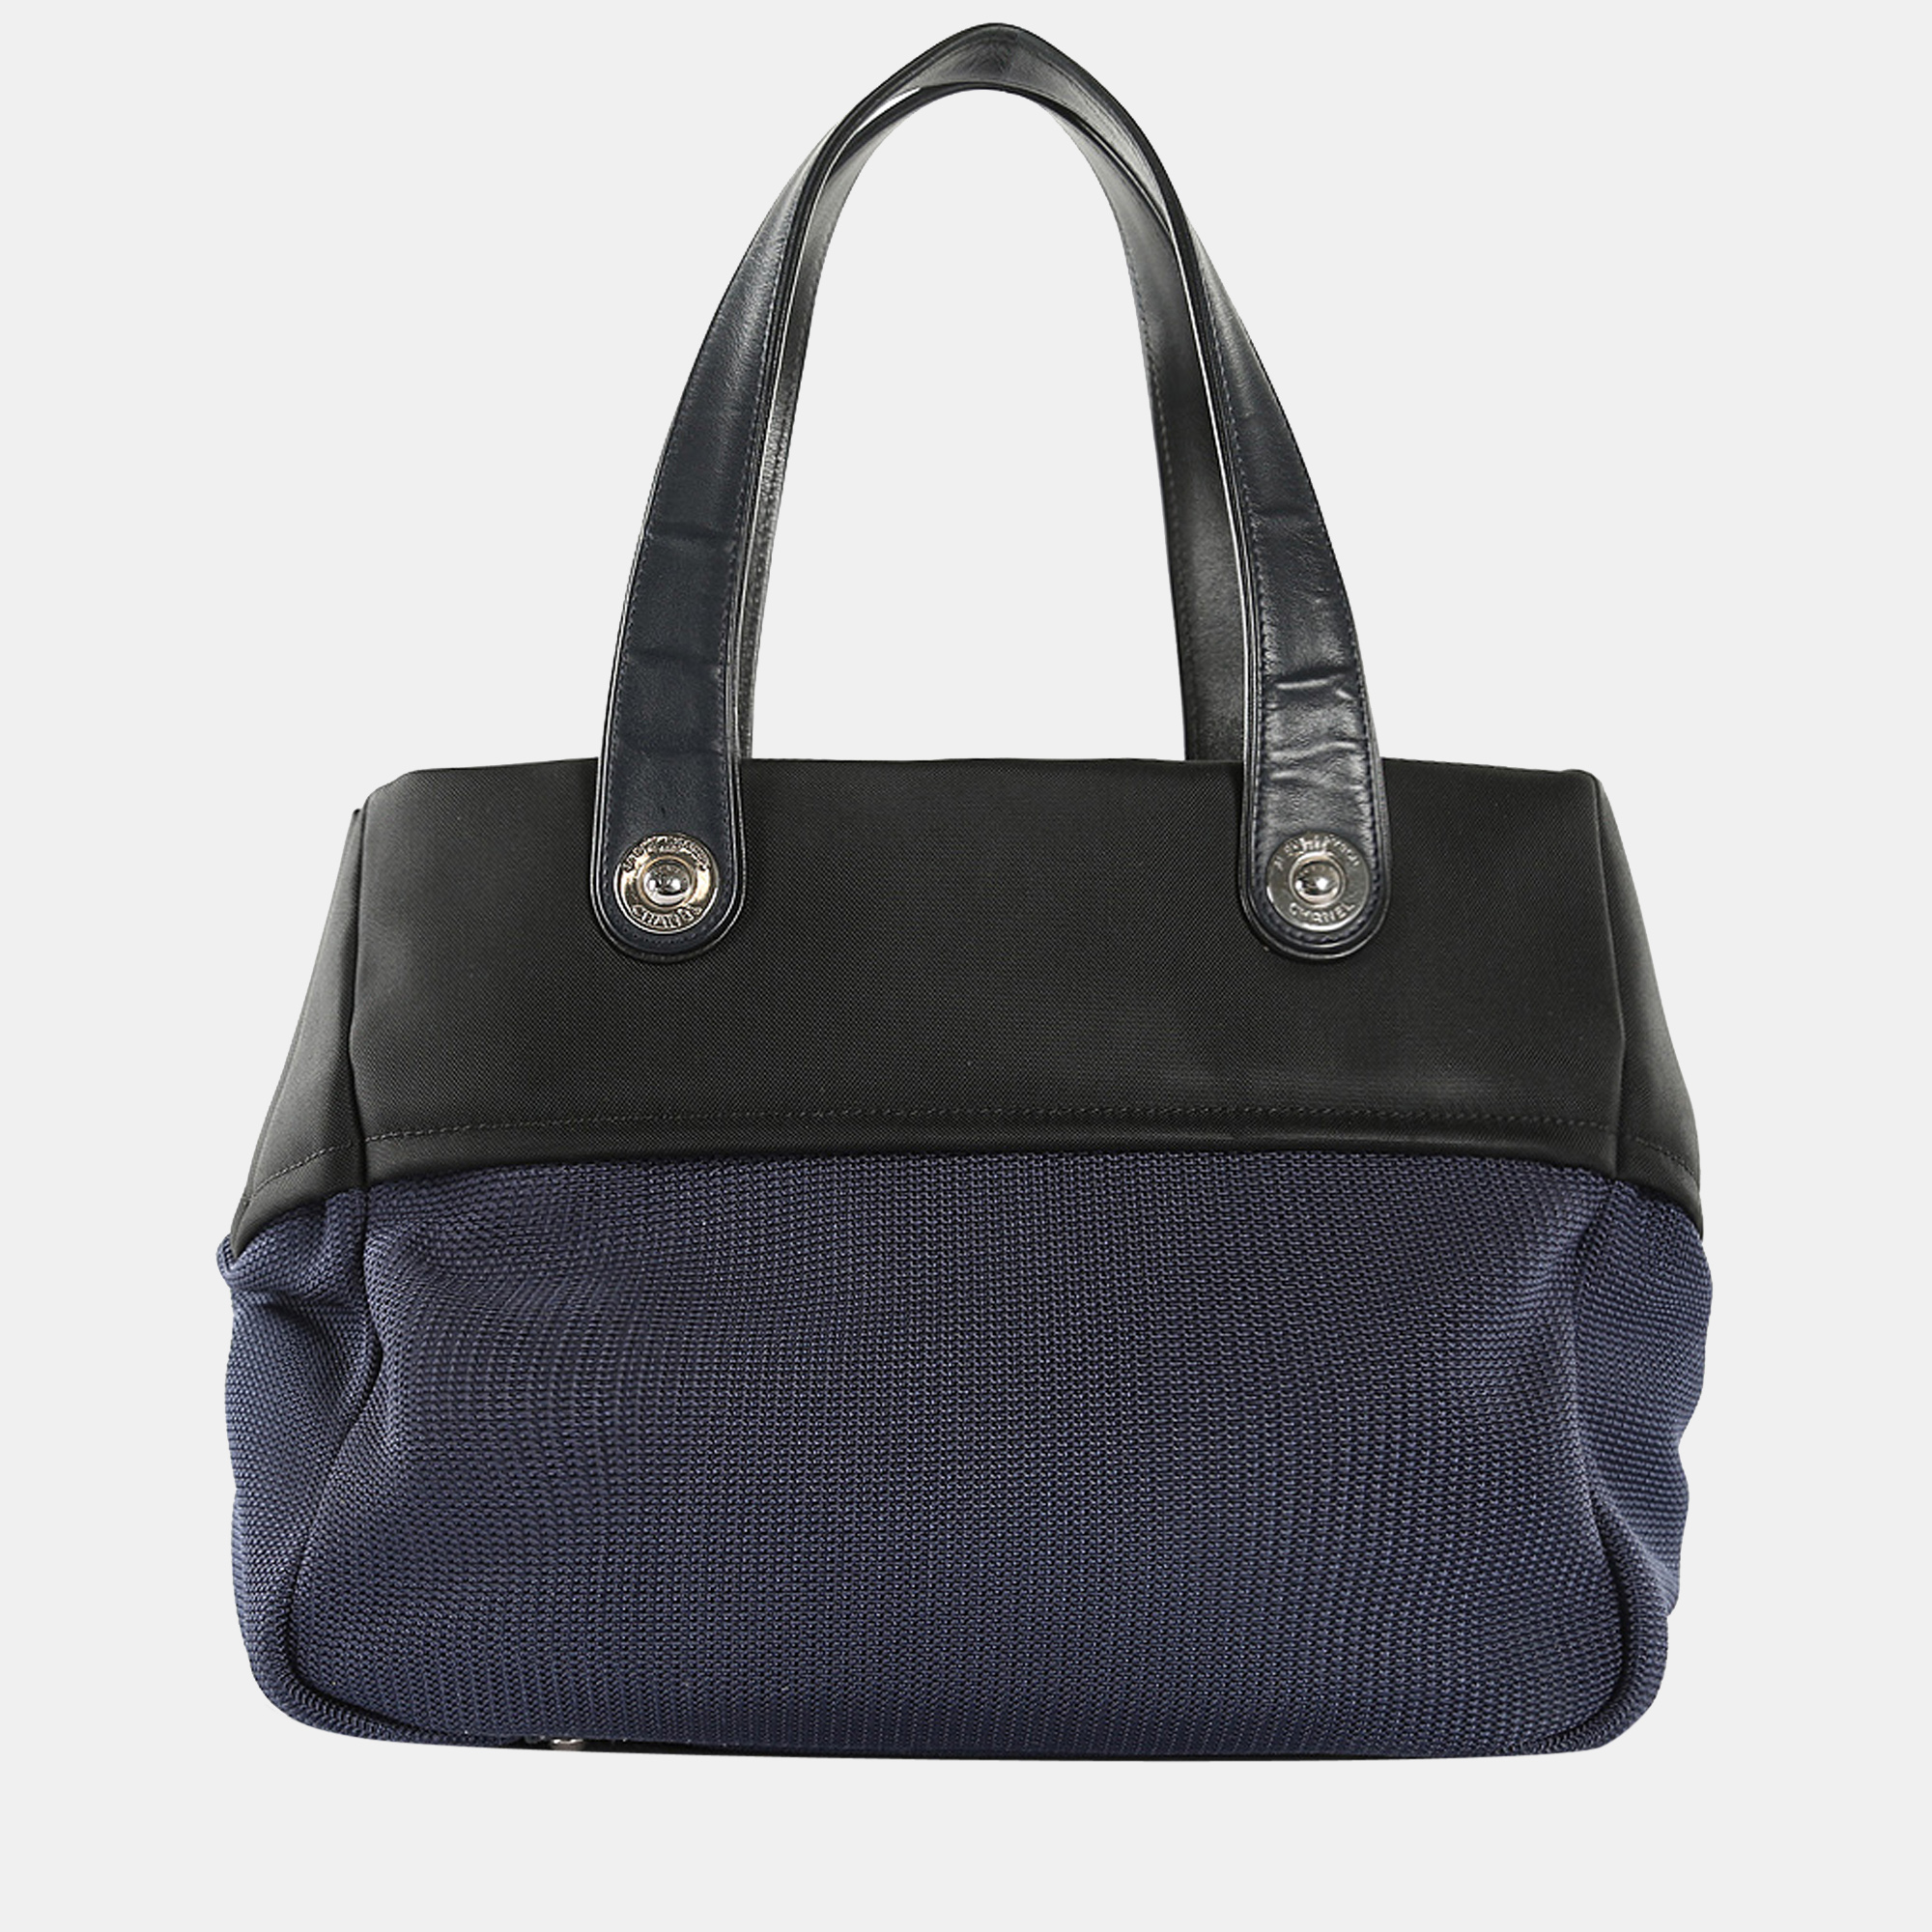 Chanel Navy Blue/Black Knit & Canvas Tote Bag